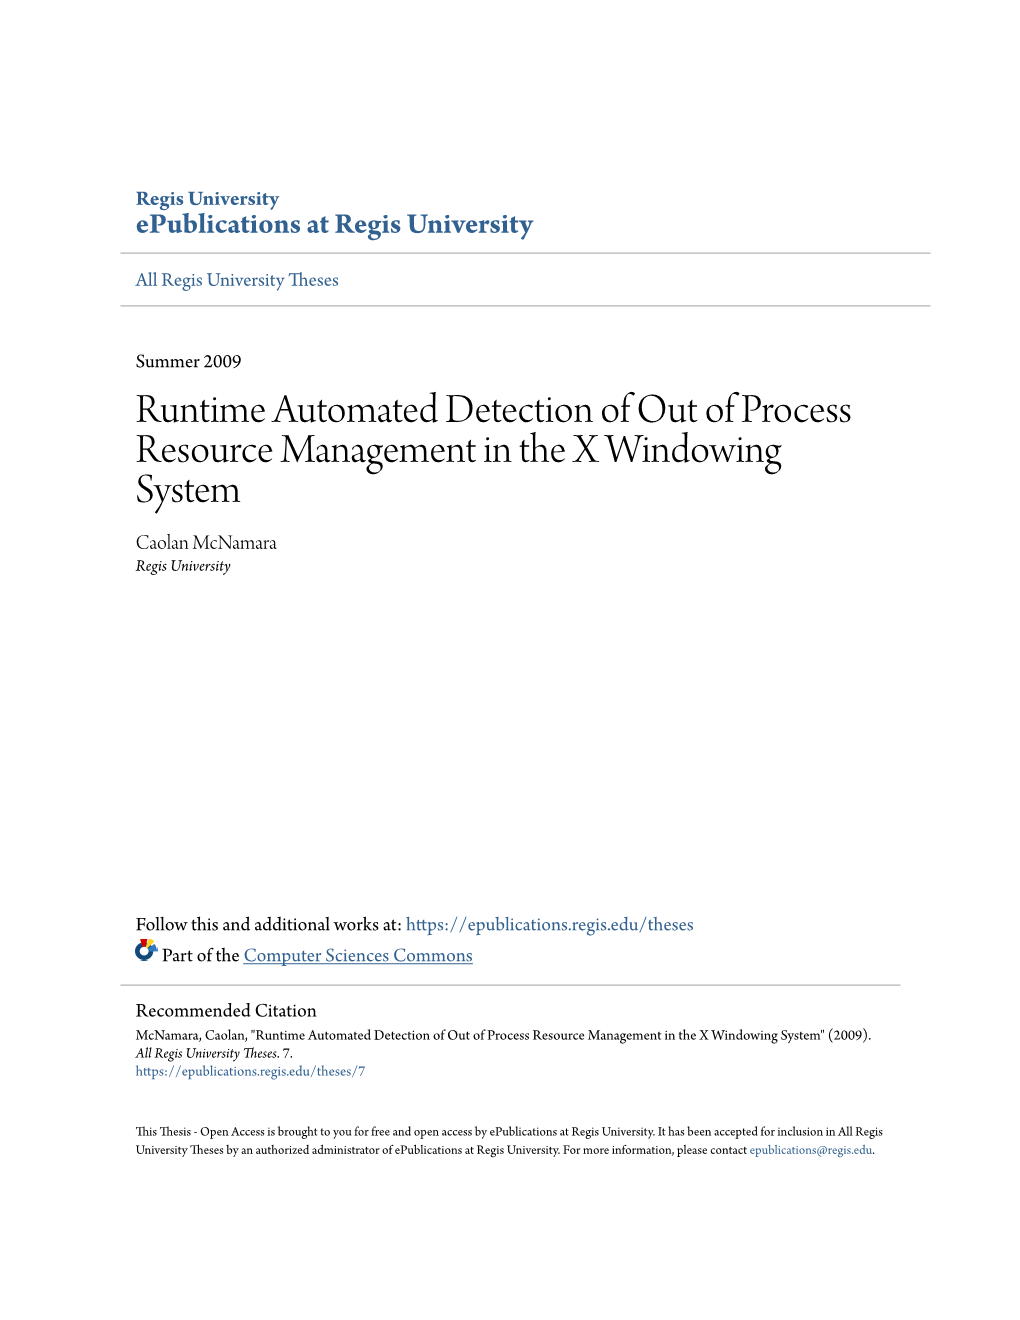 Runtime Automated Detection of out of Process Resource Management in the X Windowing System Caolan Mcnamara Regis University